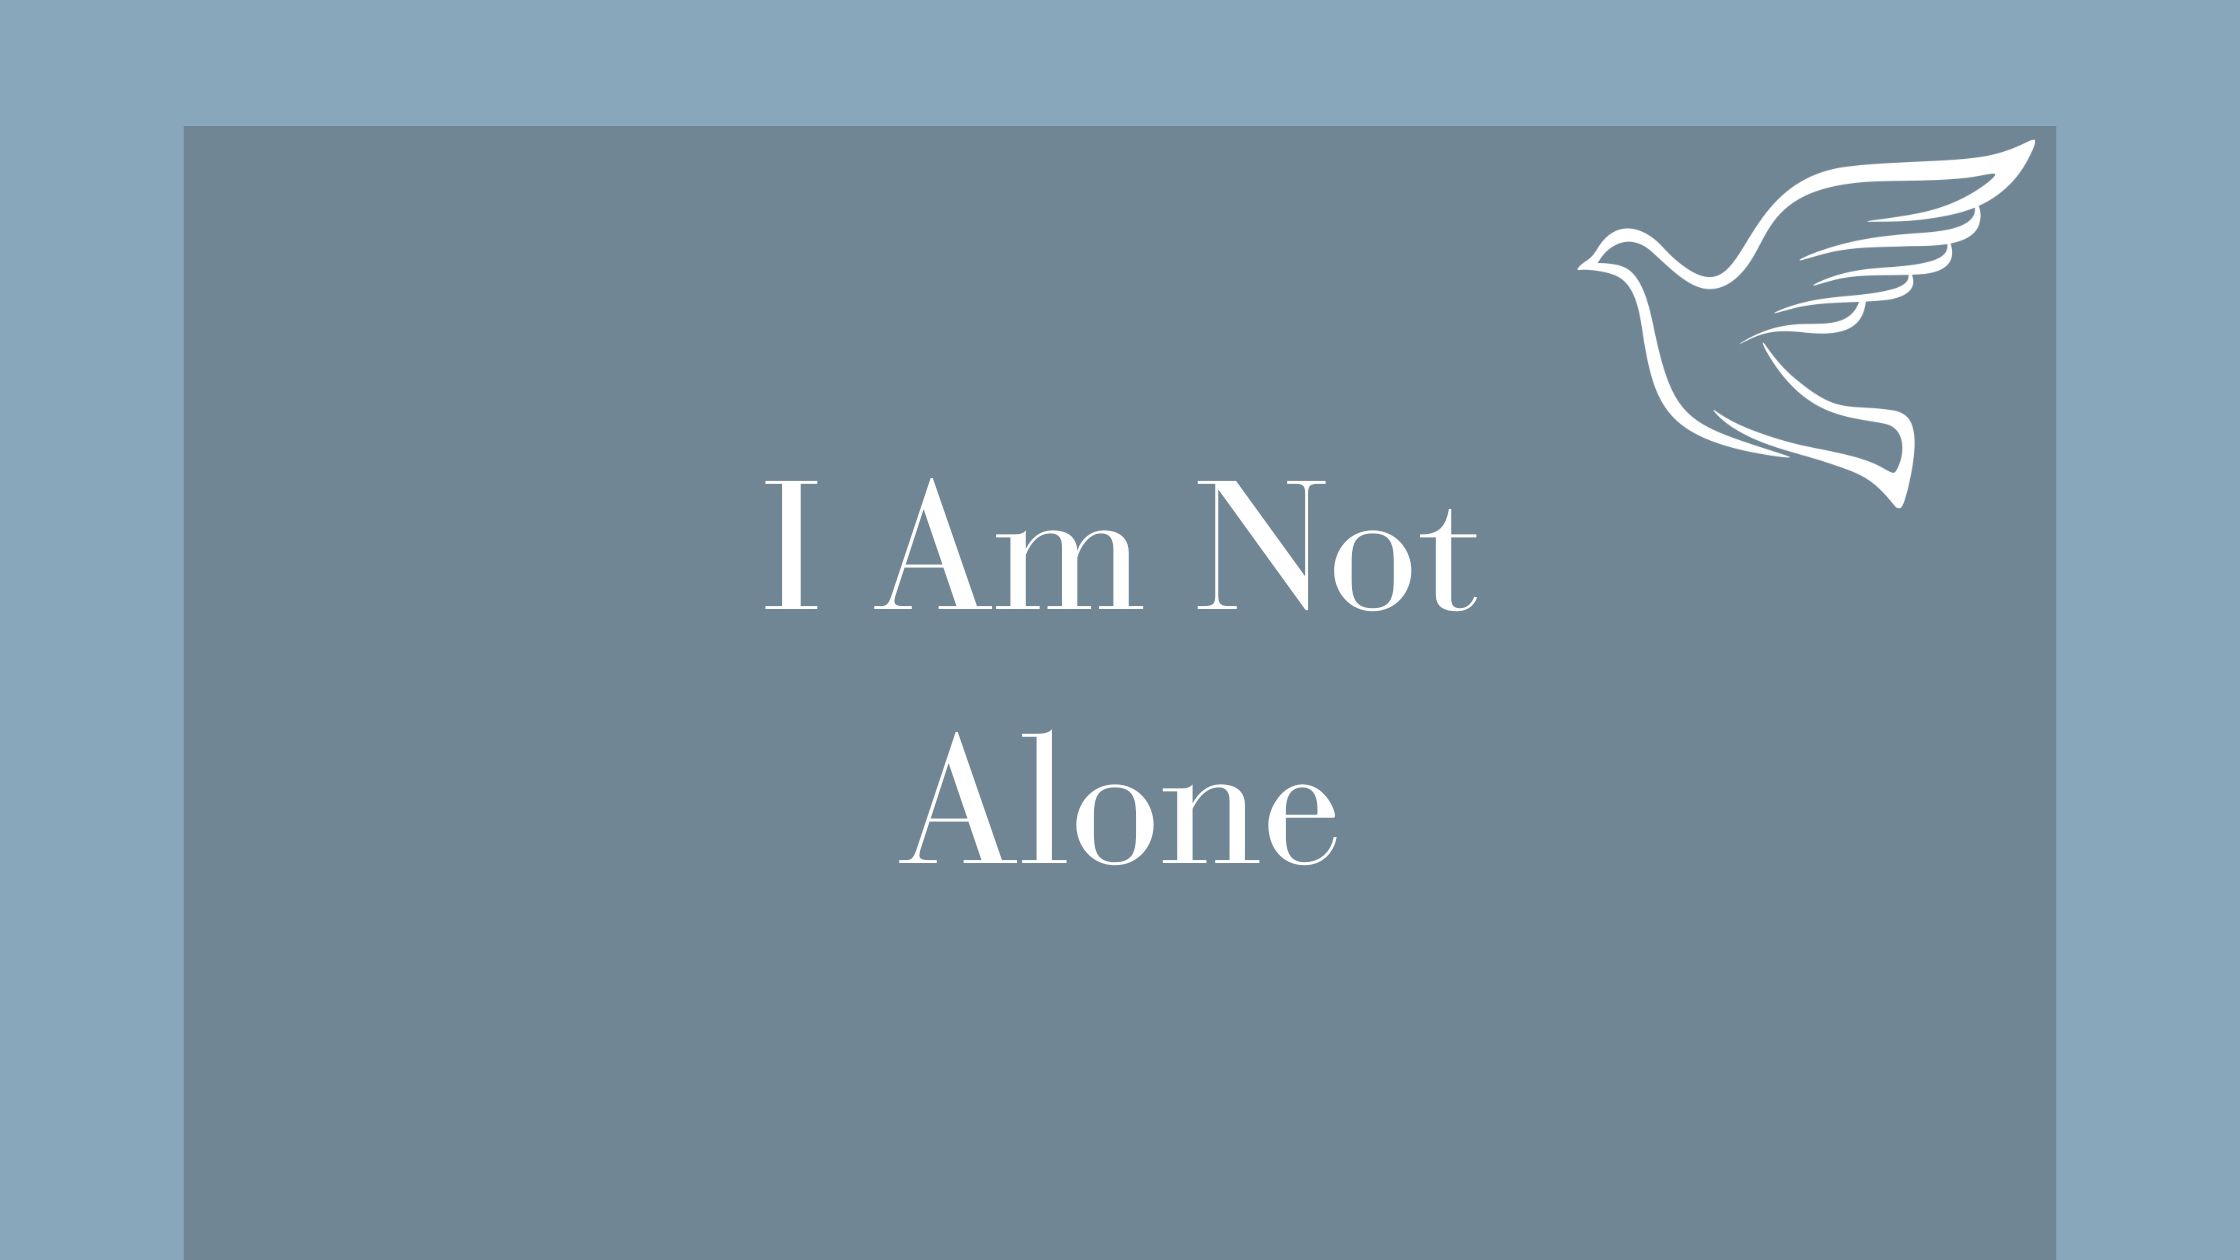 I am Not Alone (1)